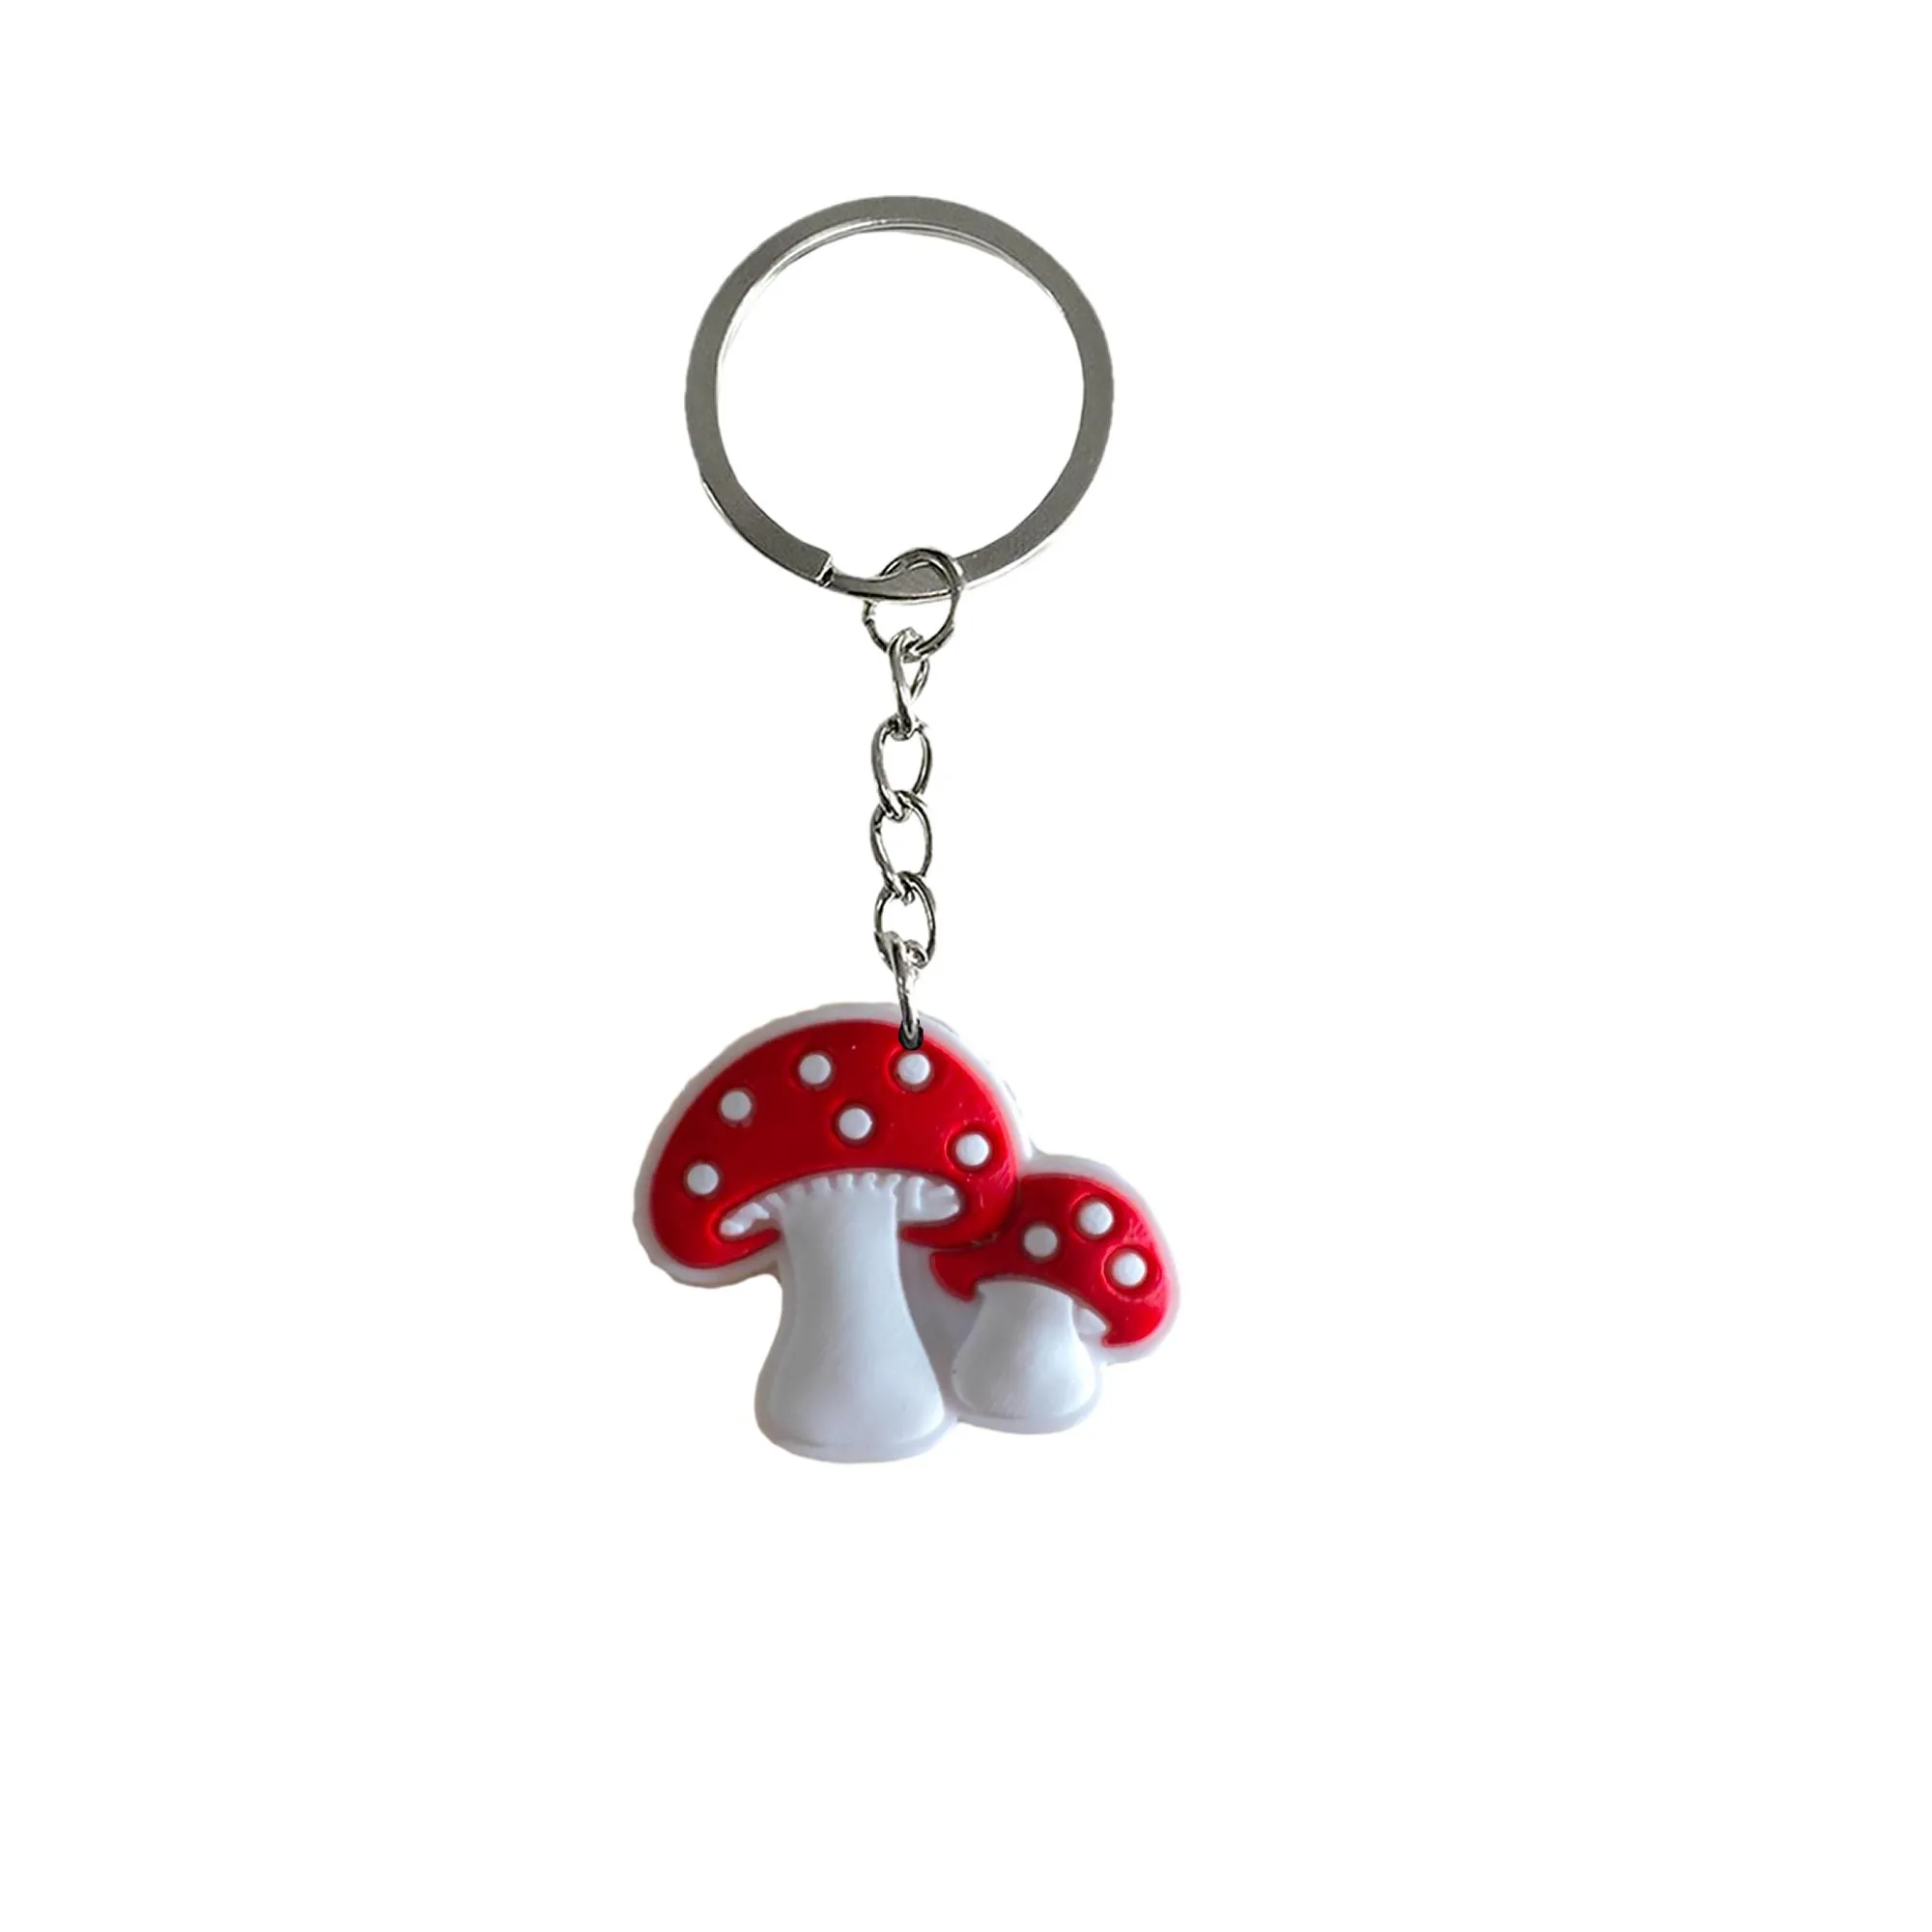 mushroom keychain for birthday christmas party favors gift tags goodie bag stuffer gifts key purse handbag charms women keyring suitable schoolbag backpack car chain kid boy girl ring fans